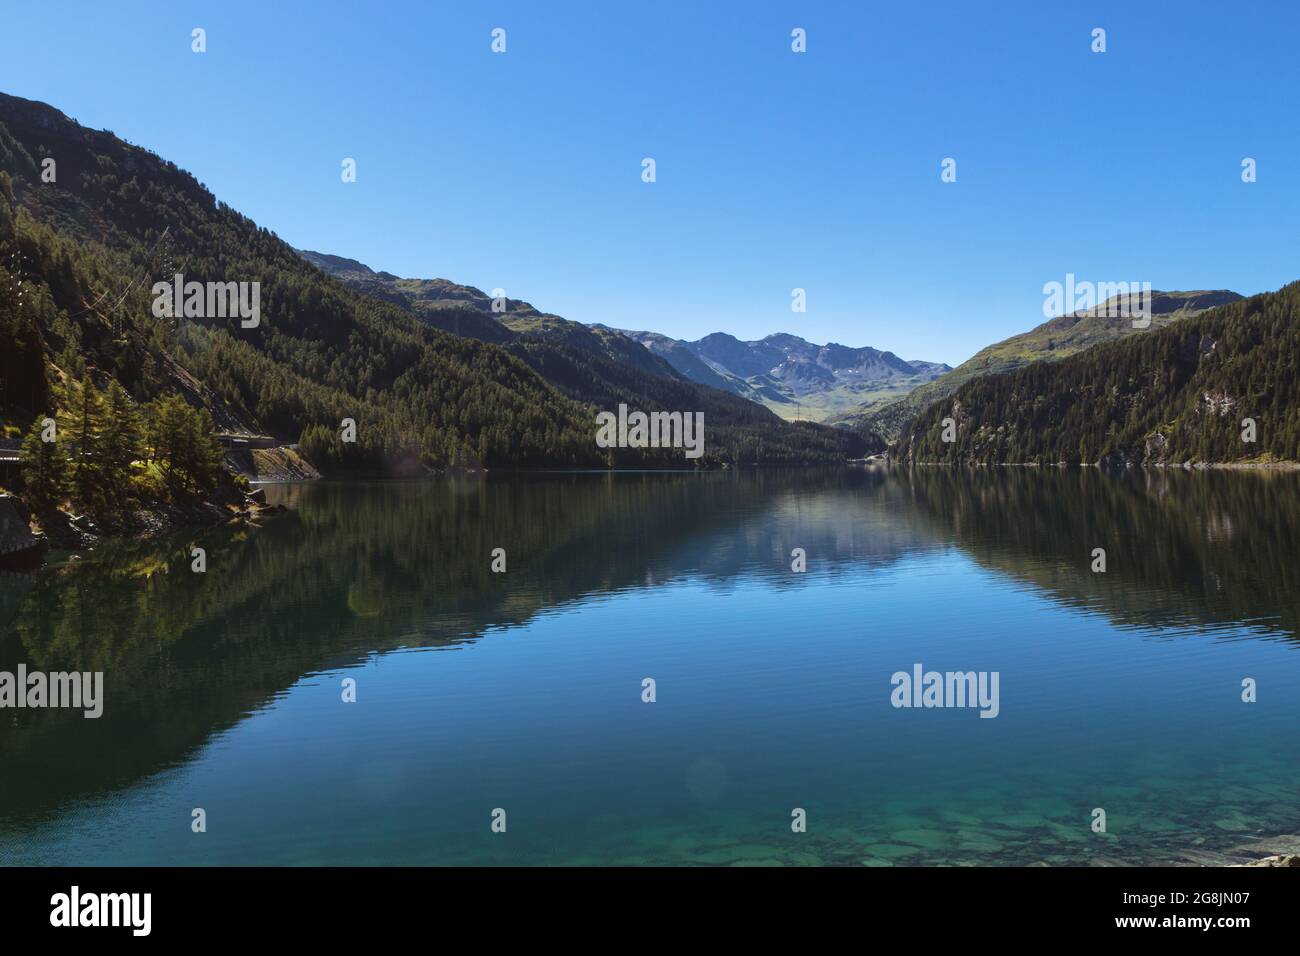 Marmorera lake on a bright summer day under clear blue sky. Julier pass, Grisons, Switzerland Stock Photo